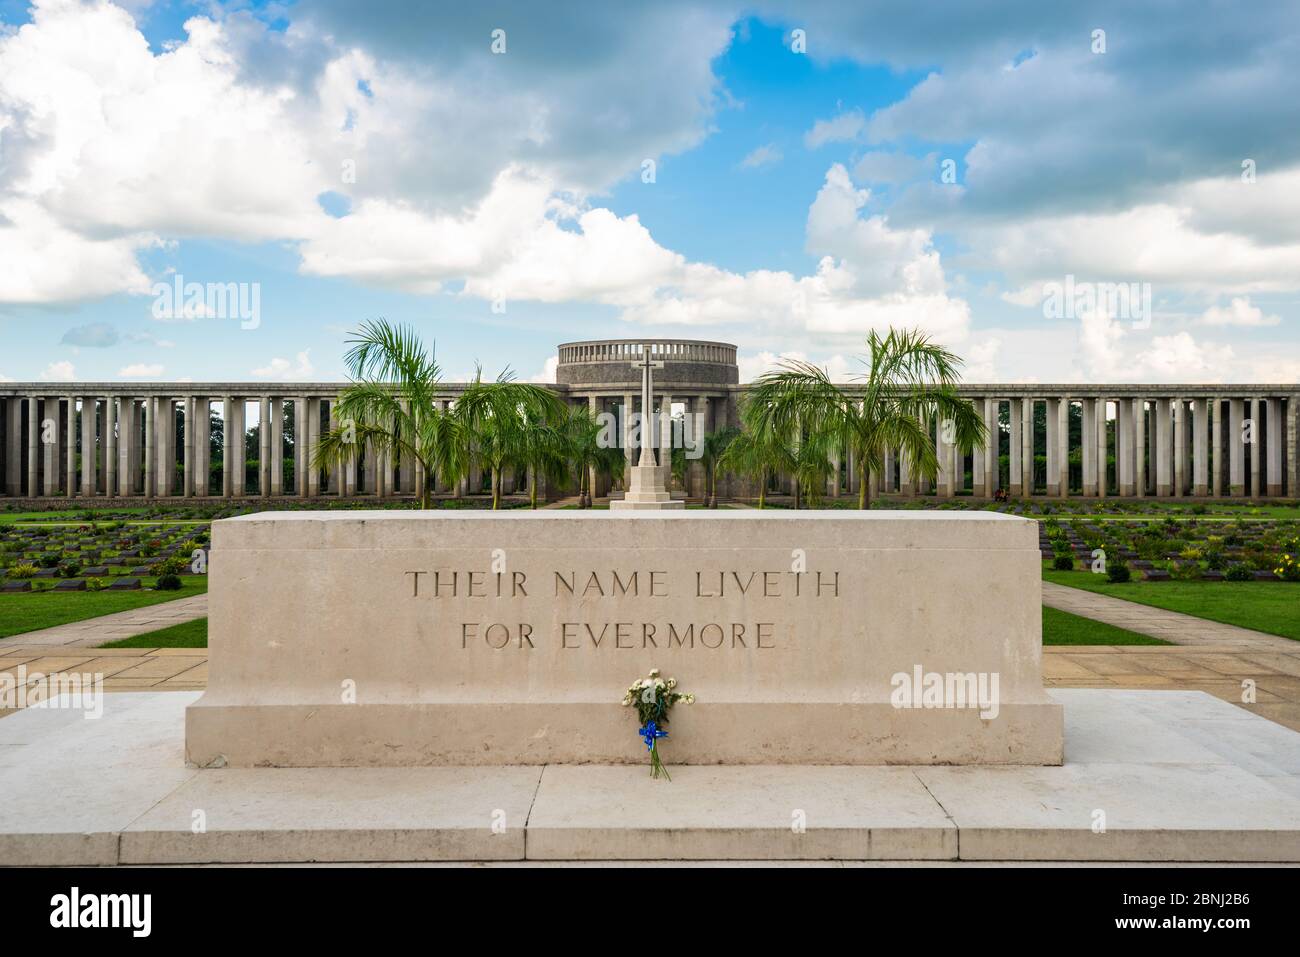 Taukkyan War Cemetery dedicated to allied losses during WWII near Yangon, Myanmar. Stock Photo